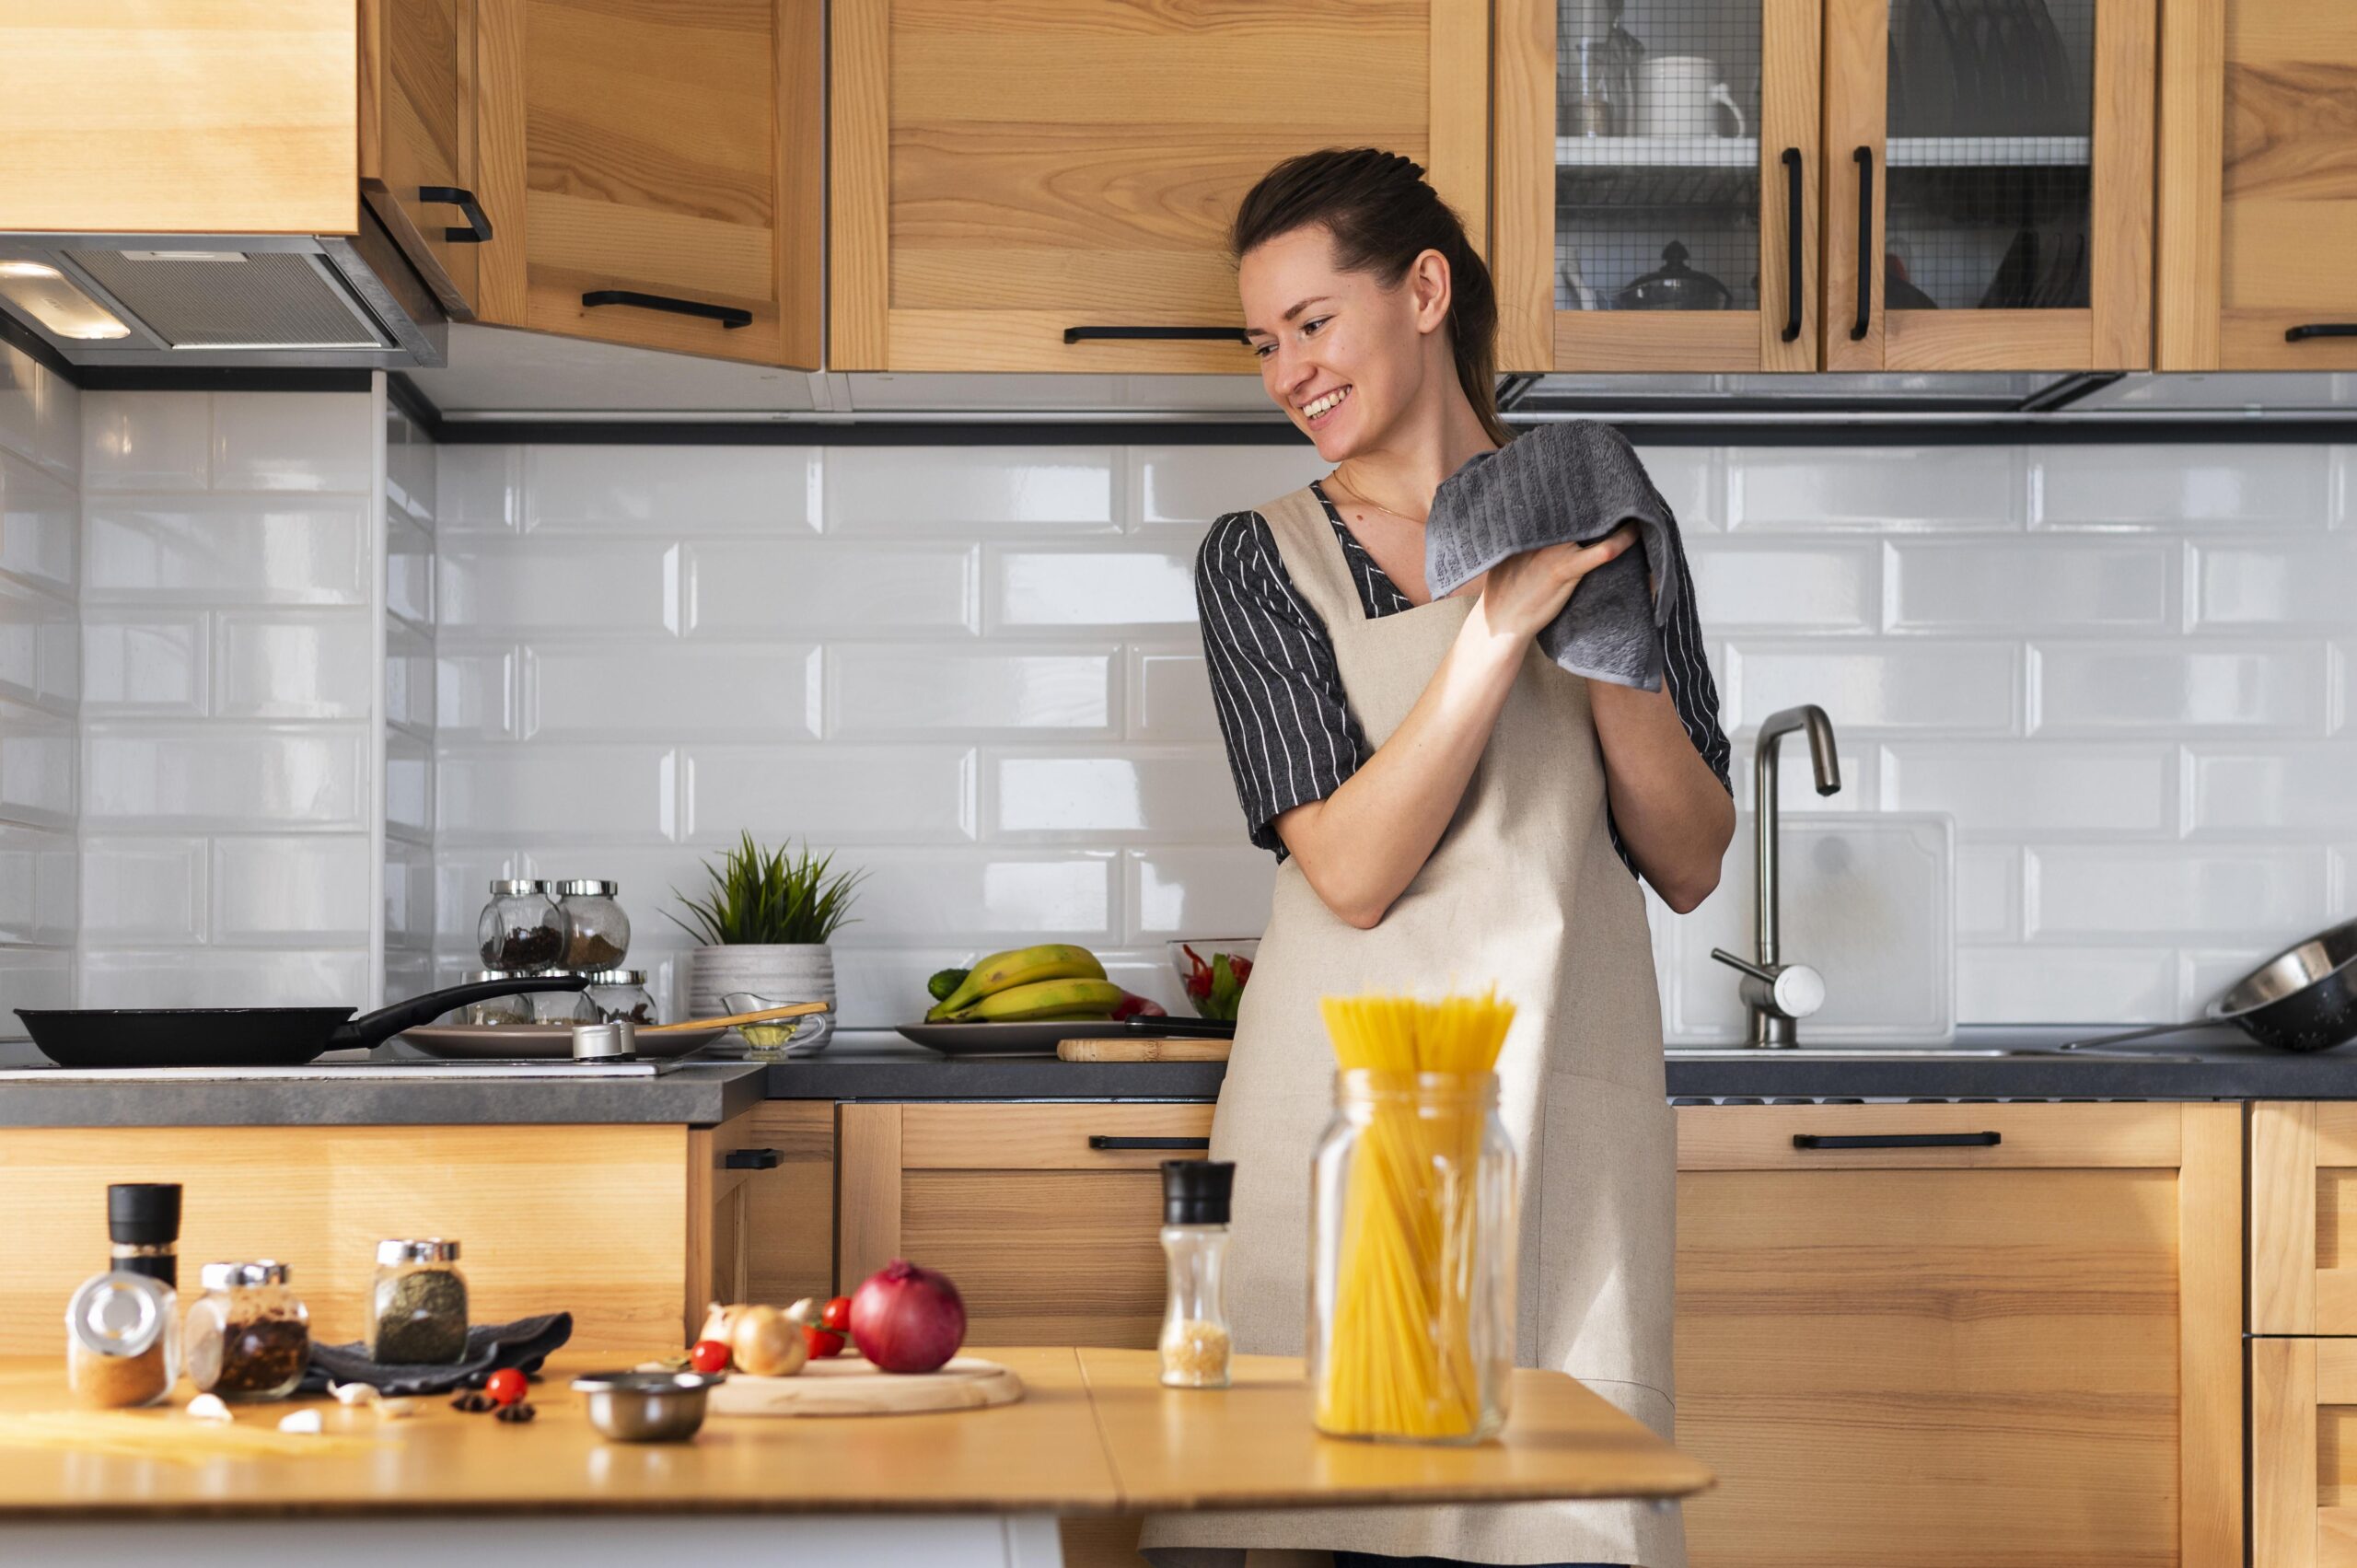 10 Hygiene Rules in the Kitchen